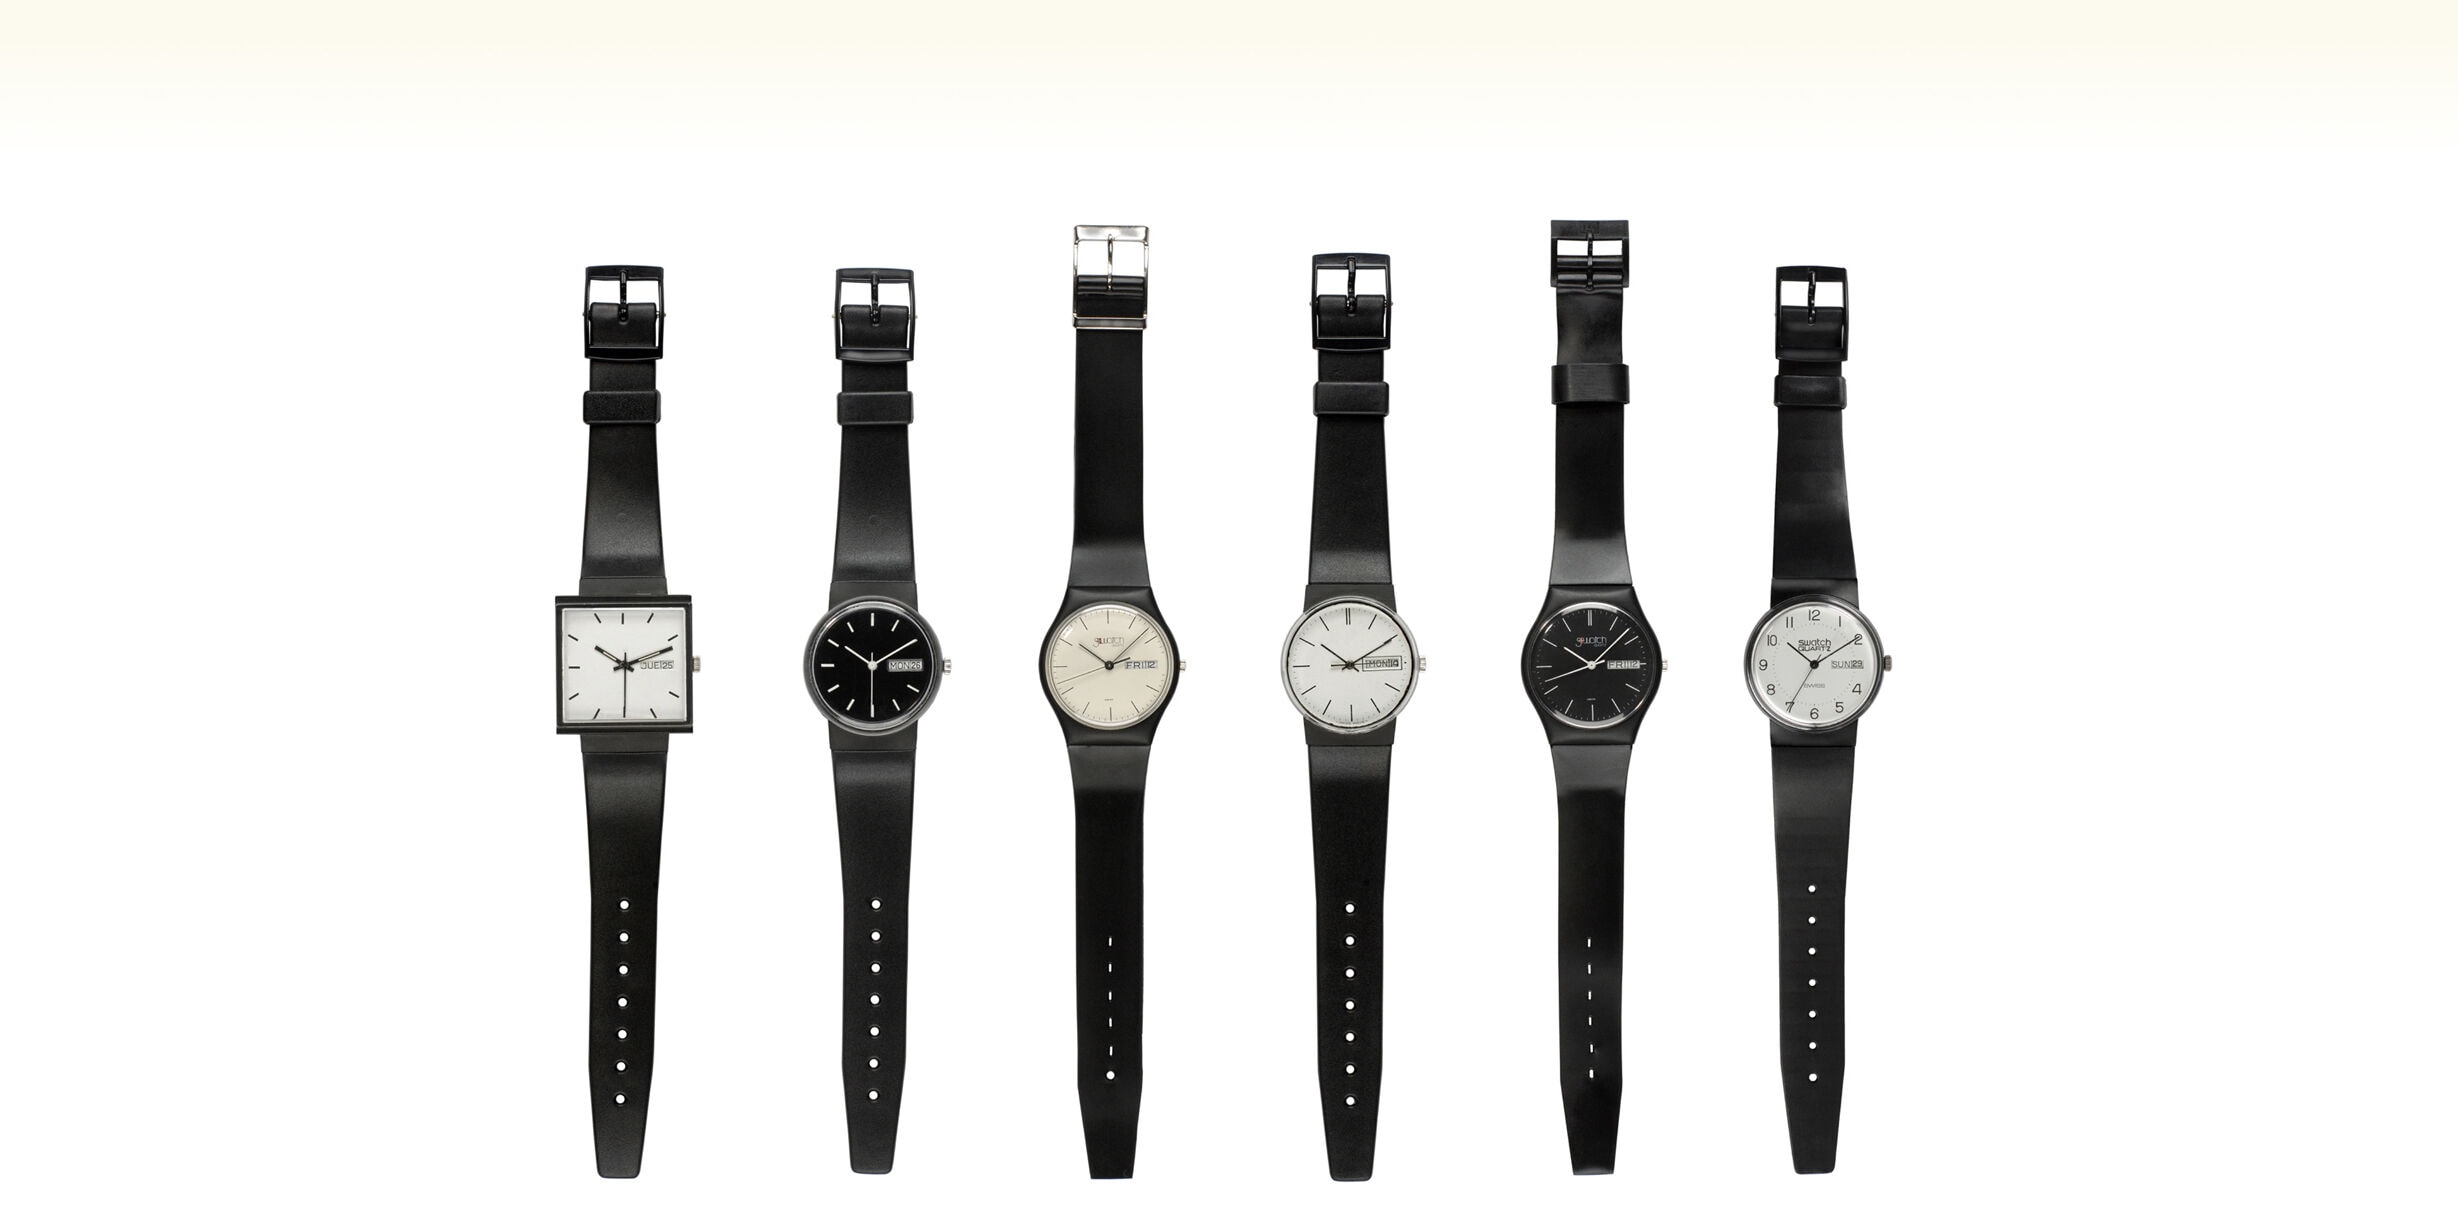 Swatch Asks What If? with their New Collection of Square, Bioceramic  Watches - Worn & Wound